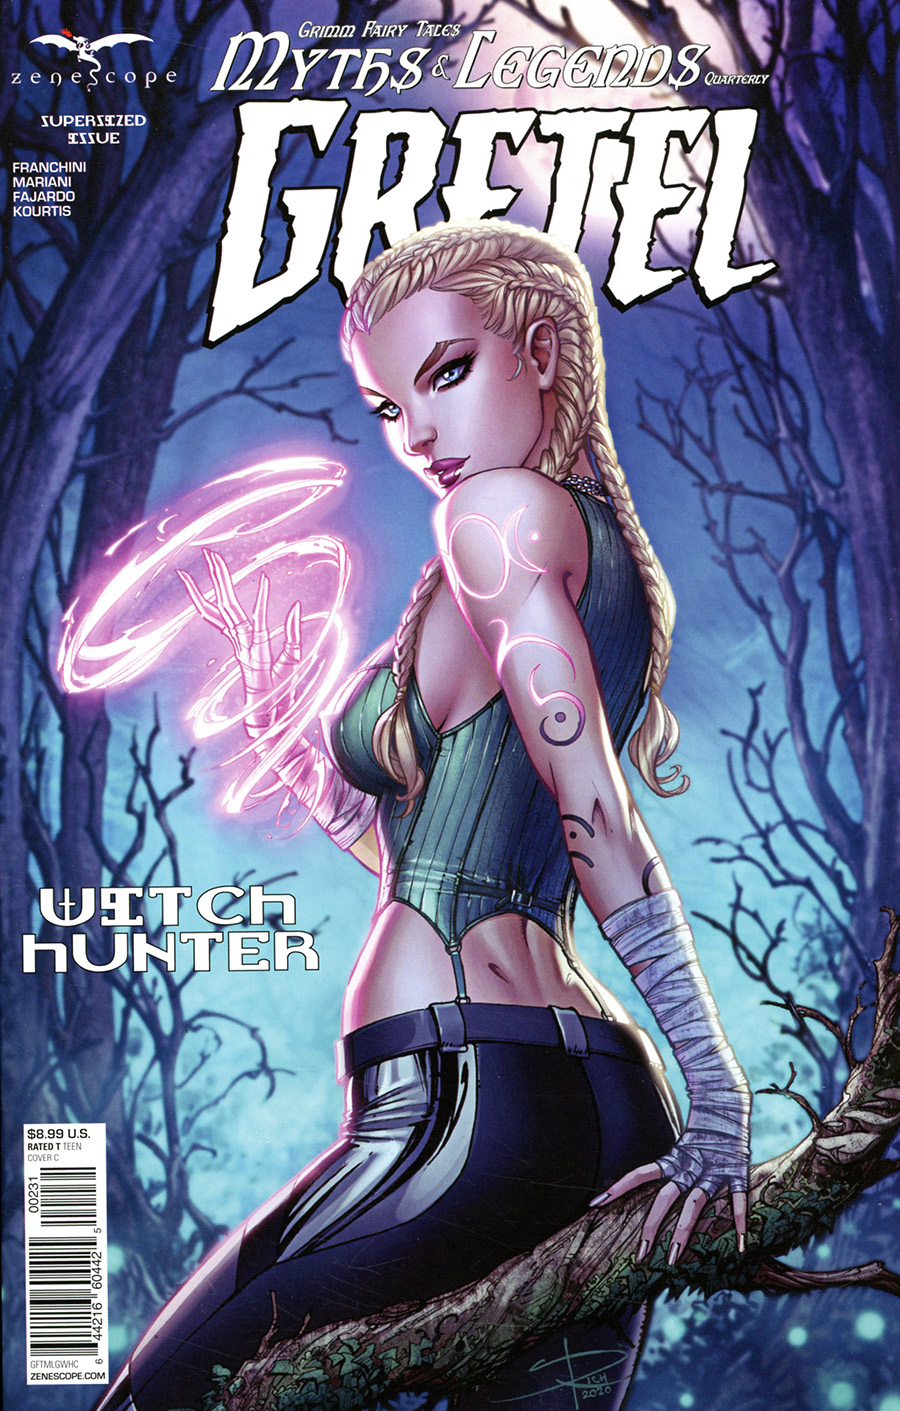 Grimm Fairy Tales Presents Myths & Legends Quarterly #2 Gretel Witch Hunter Cover C Sabine Rich